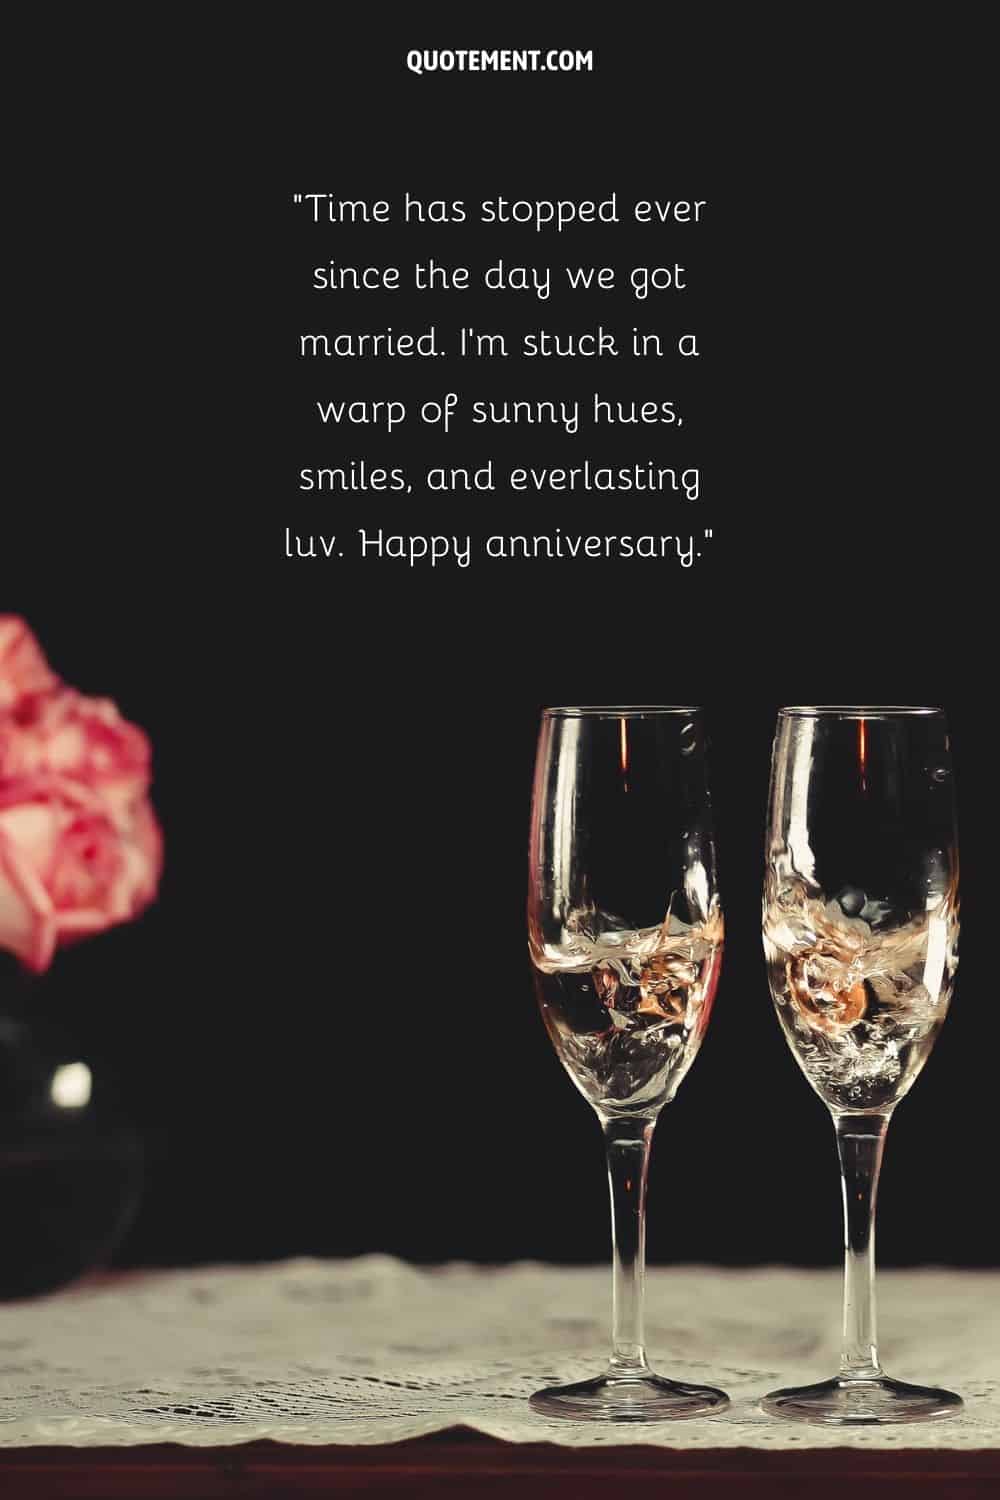 two glasses with champagne and wedding rings in them representing the loveliest happy anniversary quote for wife